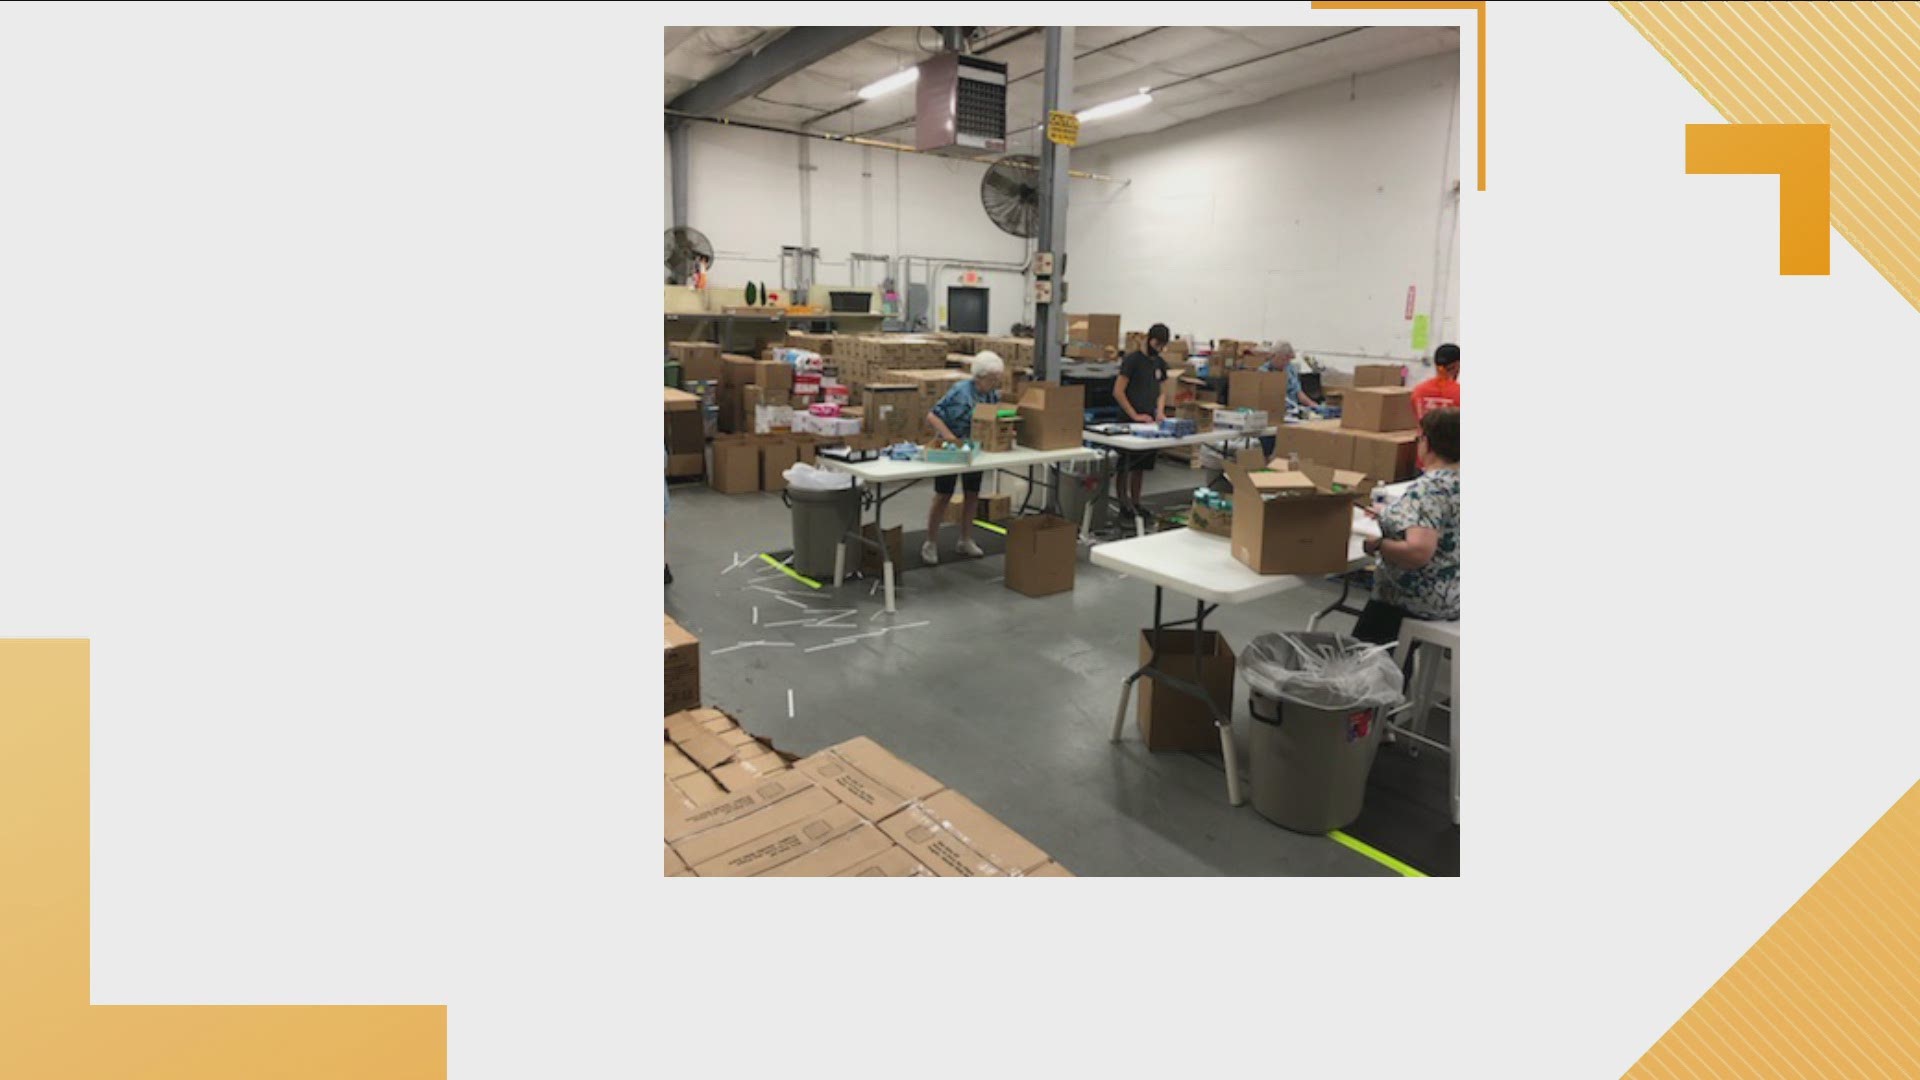 Volunteers started packing hygiene bags as part of its back to school program.